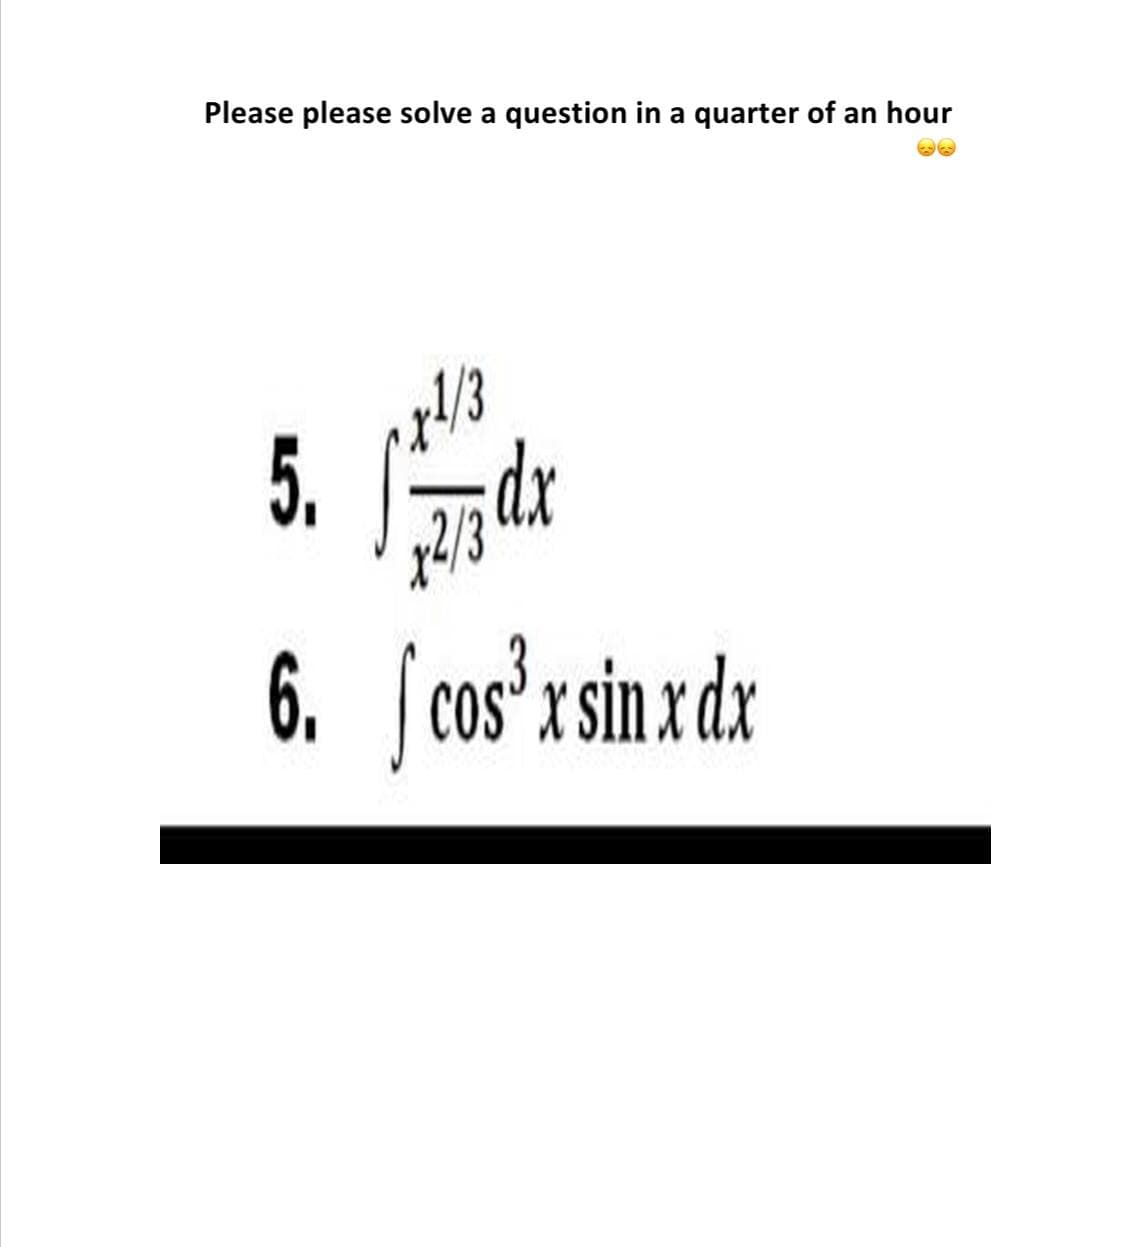 Please please solve a question in a quarter of an hour
5. dr
6. cos'x sin x dx
